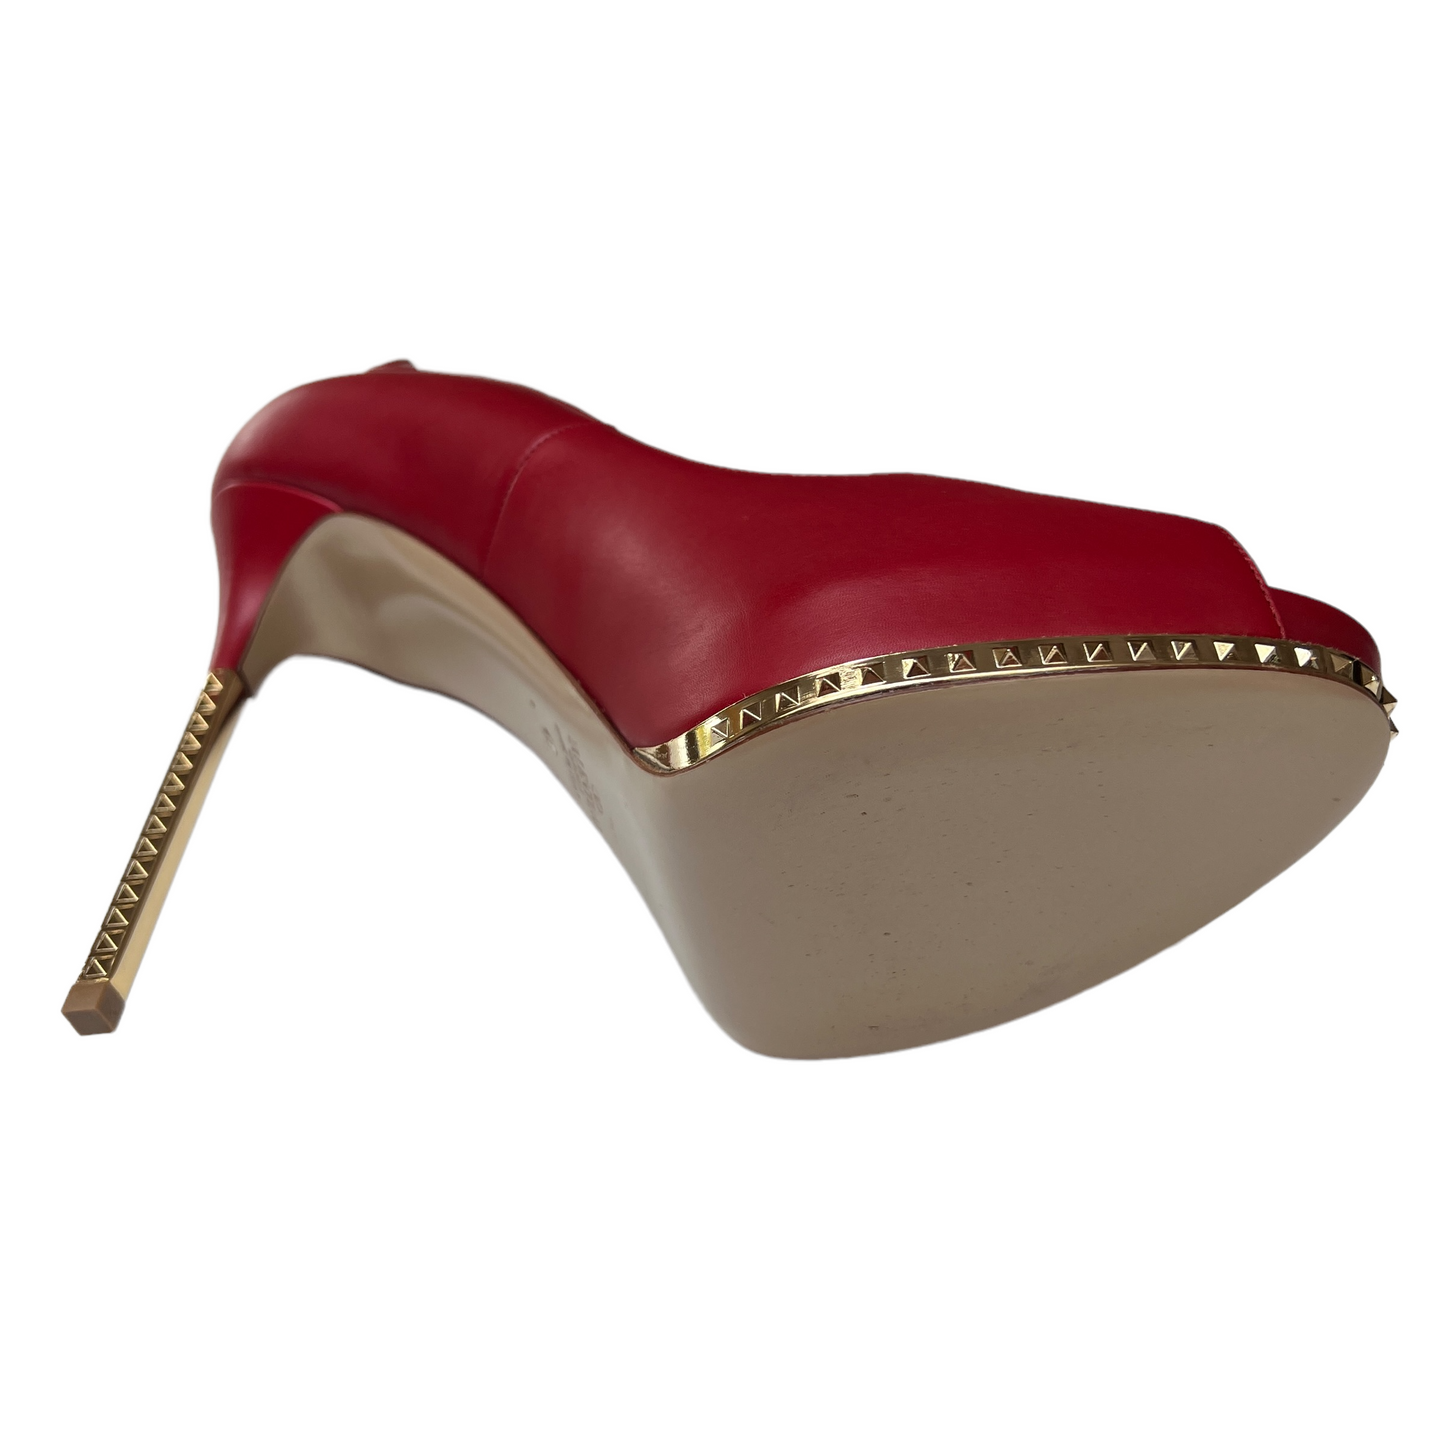 Red Leather High Heels - 10